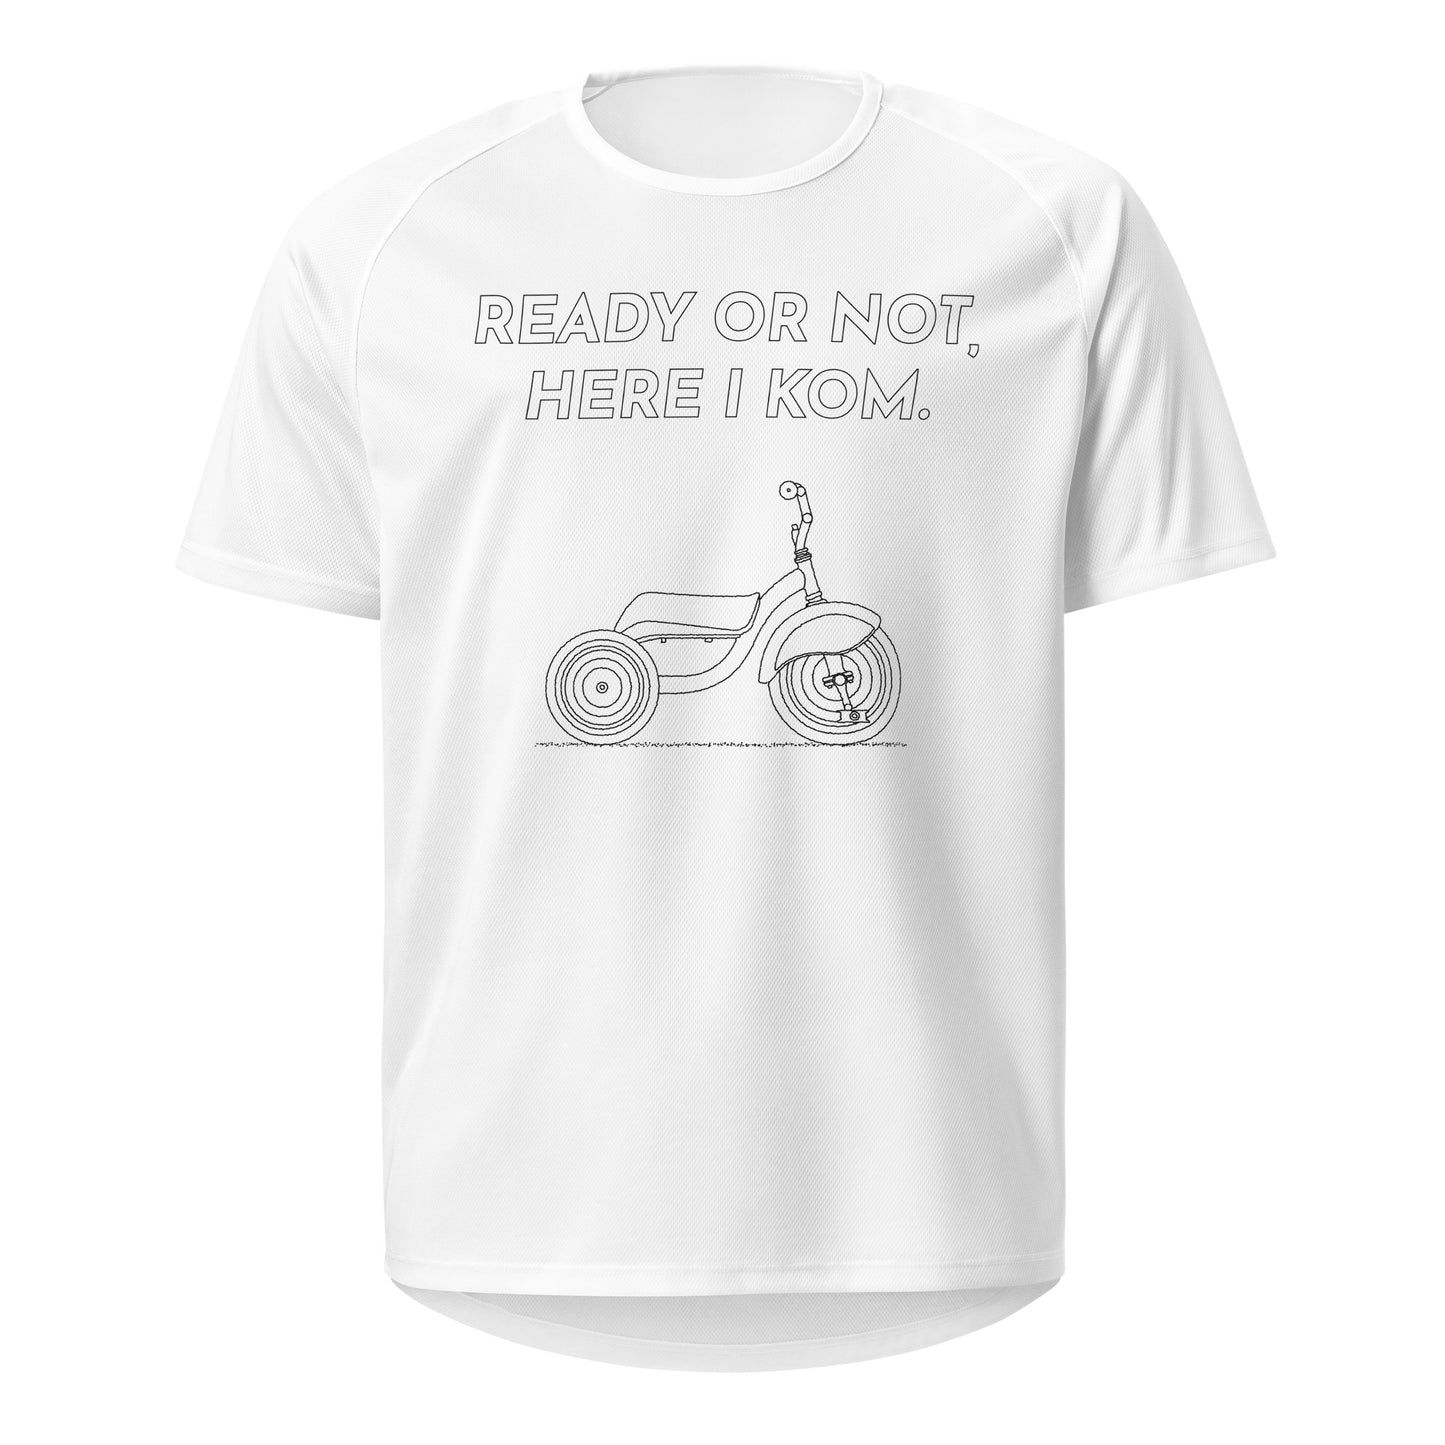 Ready Or Not Here I KOM, Tricycle Sports Jersey, Adult Cyclist